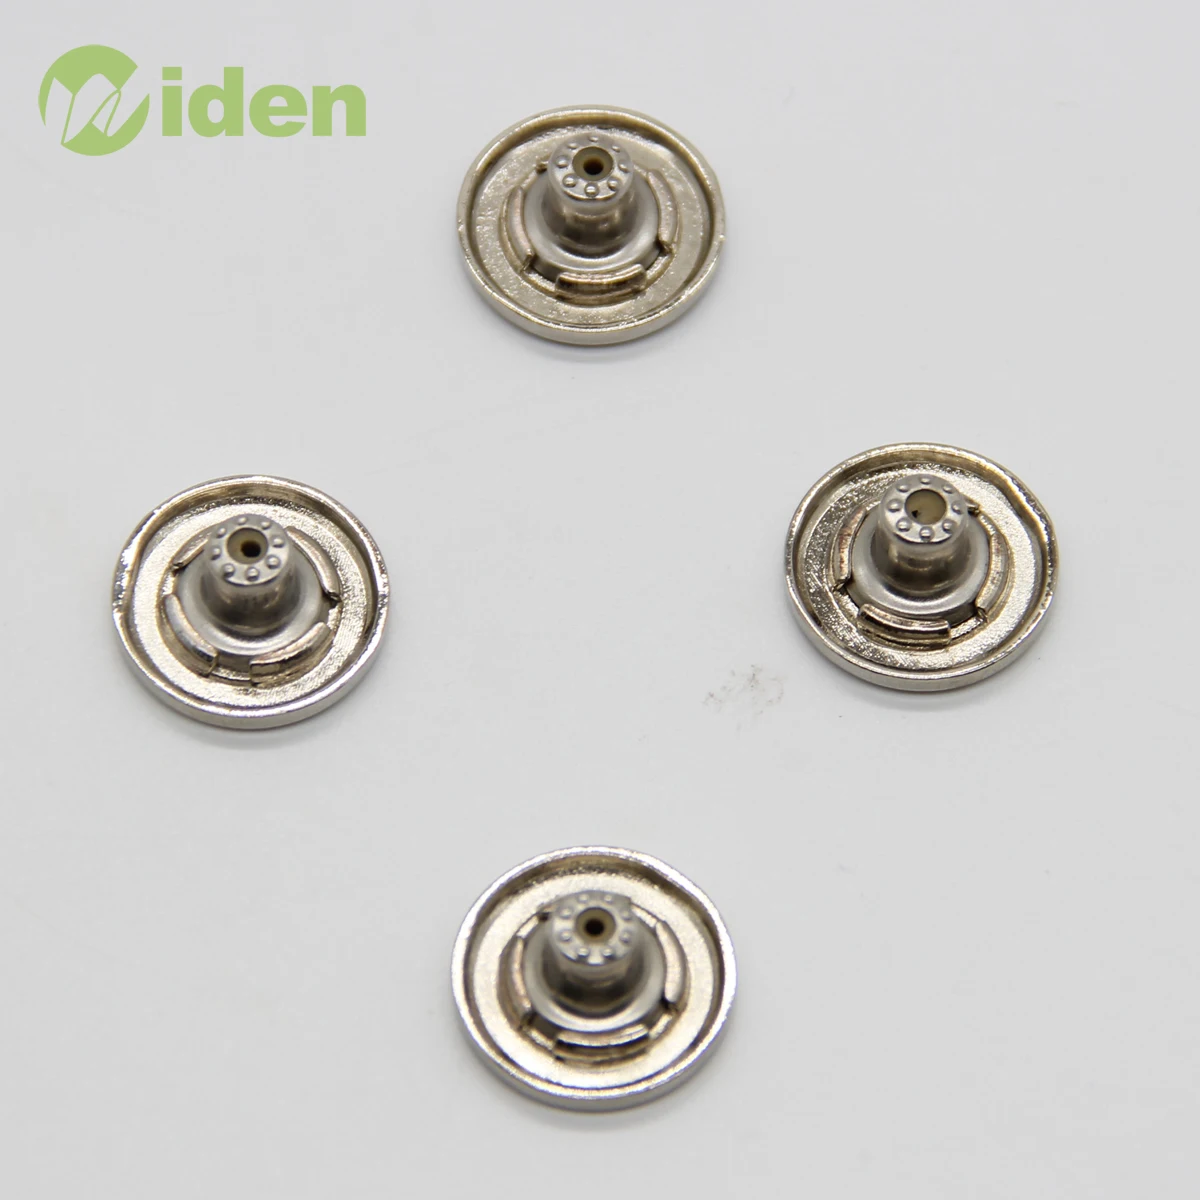 High Quality Vintage Buttons Metal Jeans Button For Denim Clothing